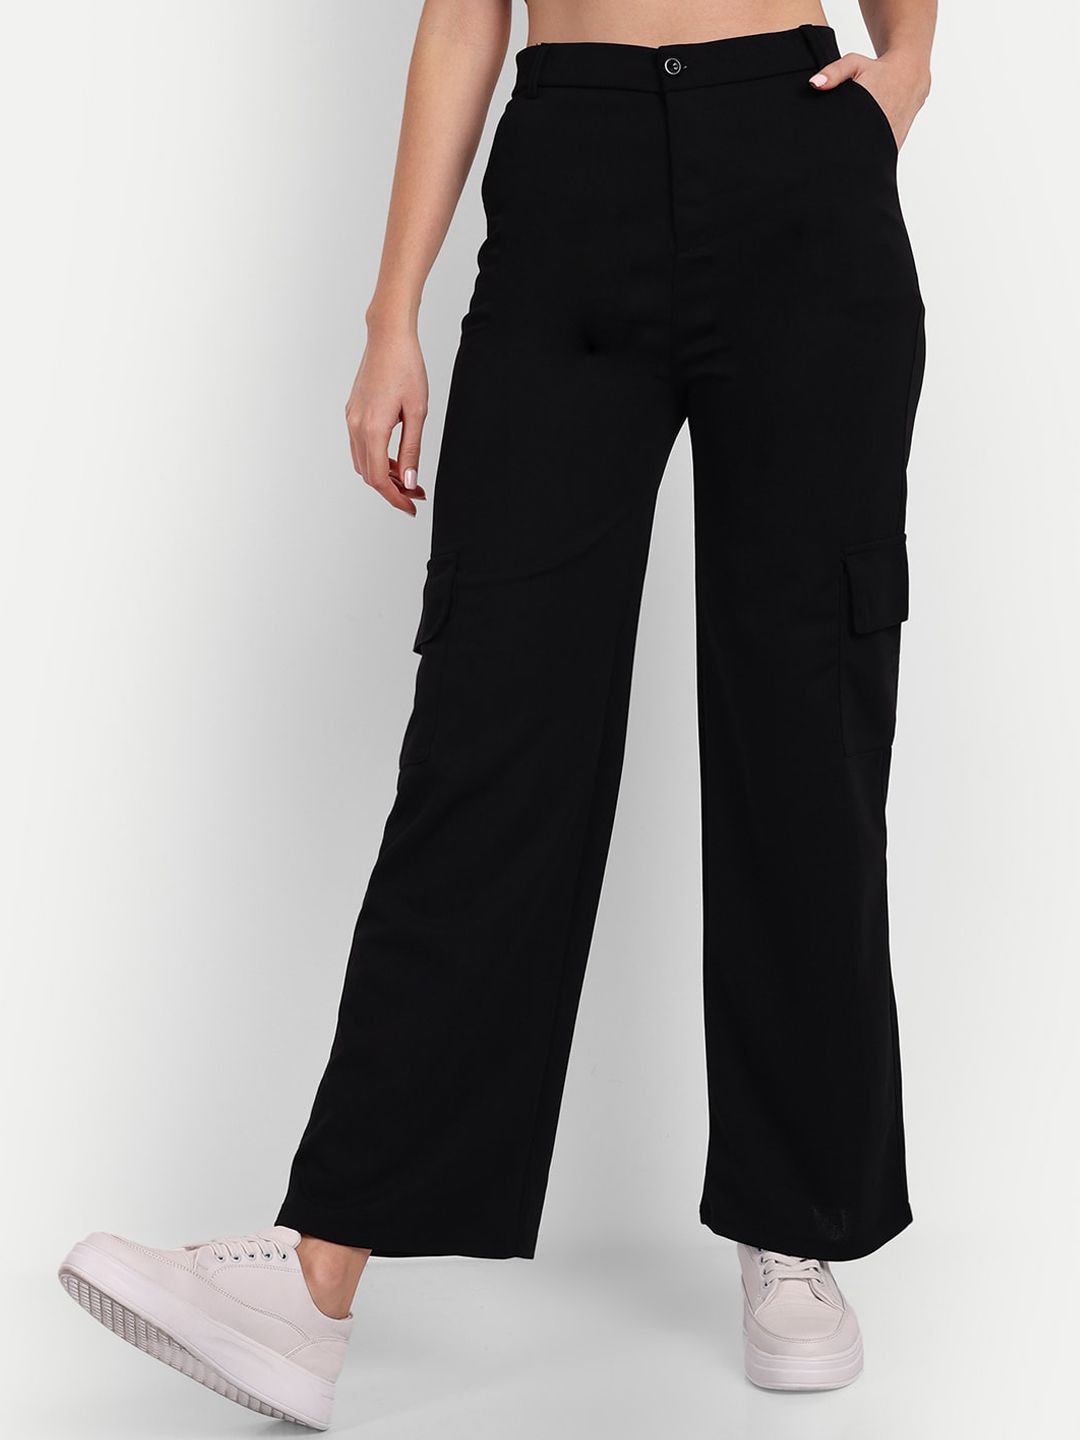 Next One Women Relaxed Loose Fit High-Rise Cargos Trousers Price in India